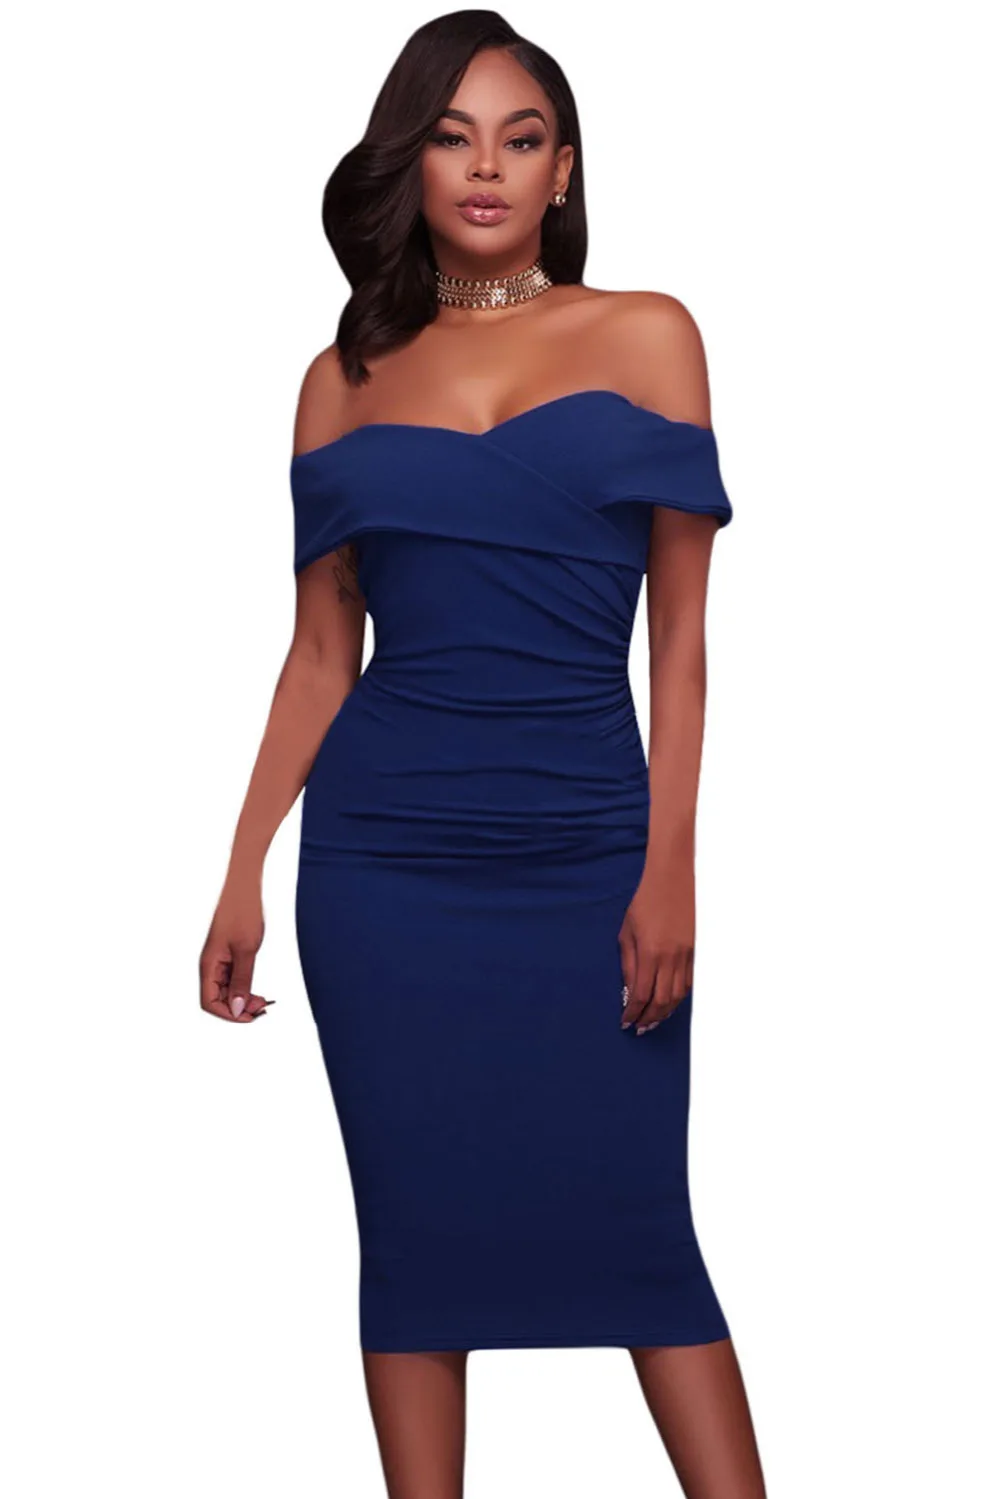 Royal Blue Ruched Off Shoulder Bodycon Midi Dress 2017 Modest Pleated